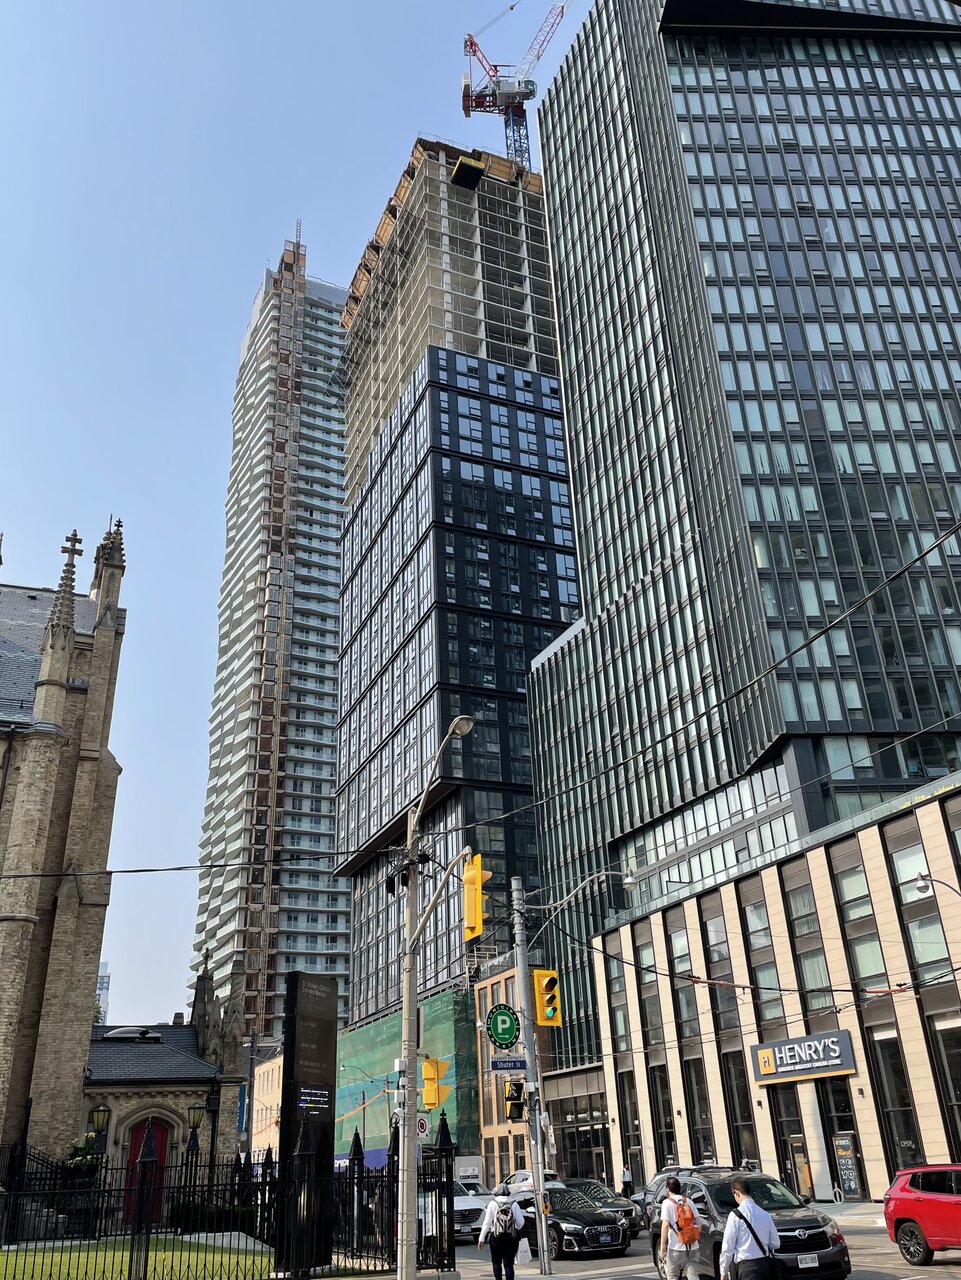 199 Church Approaches 39 Storeys as Construction Continues ...